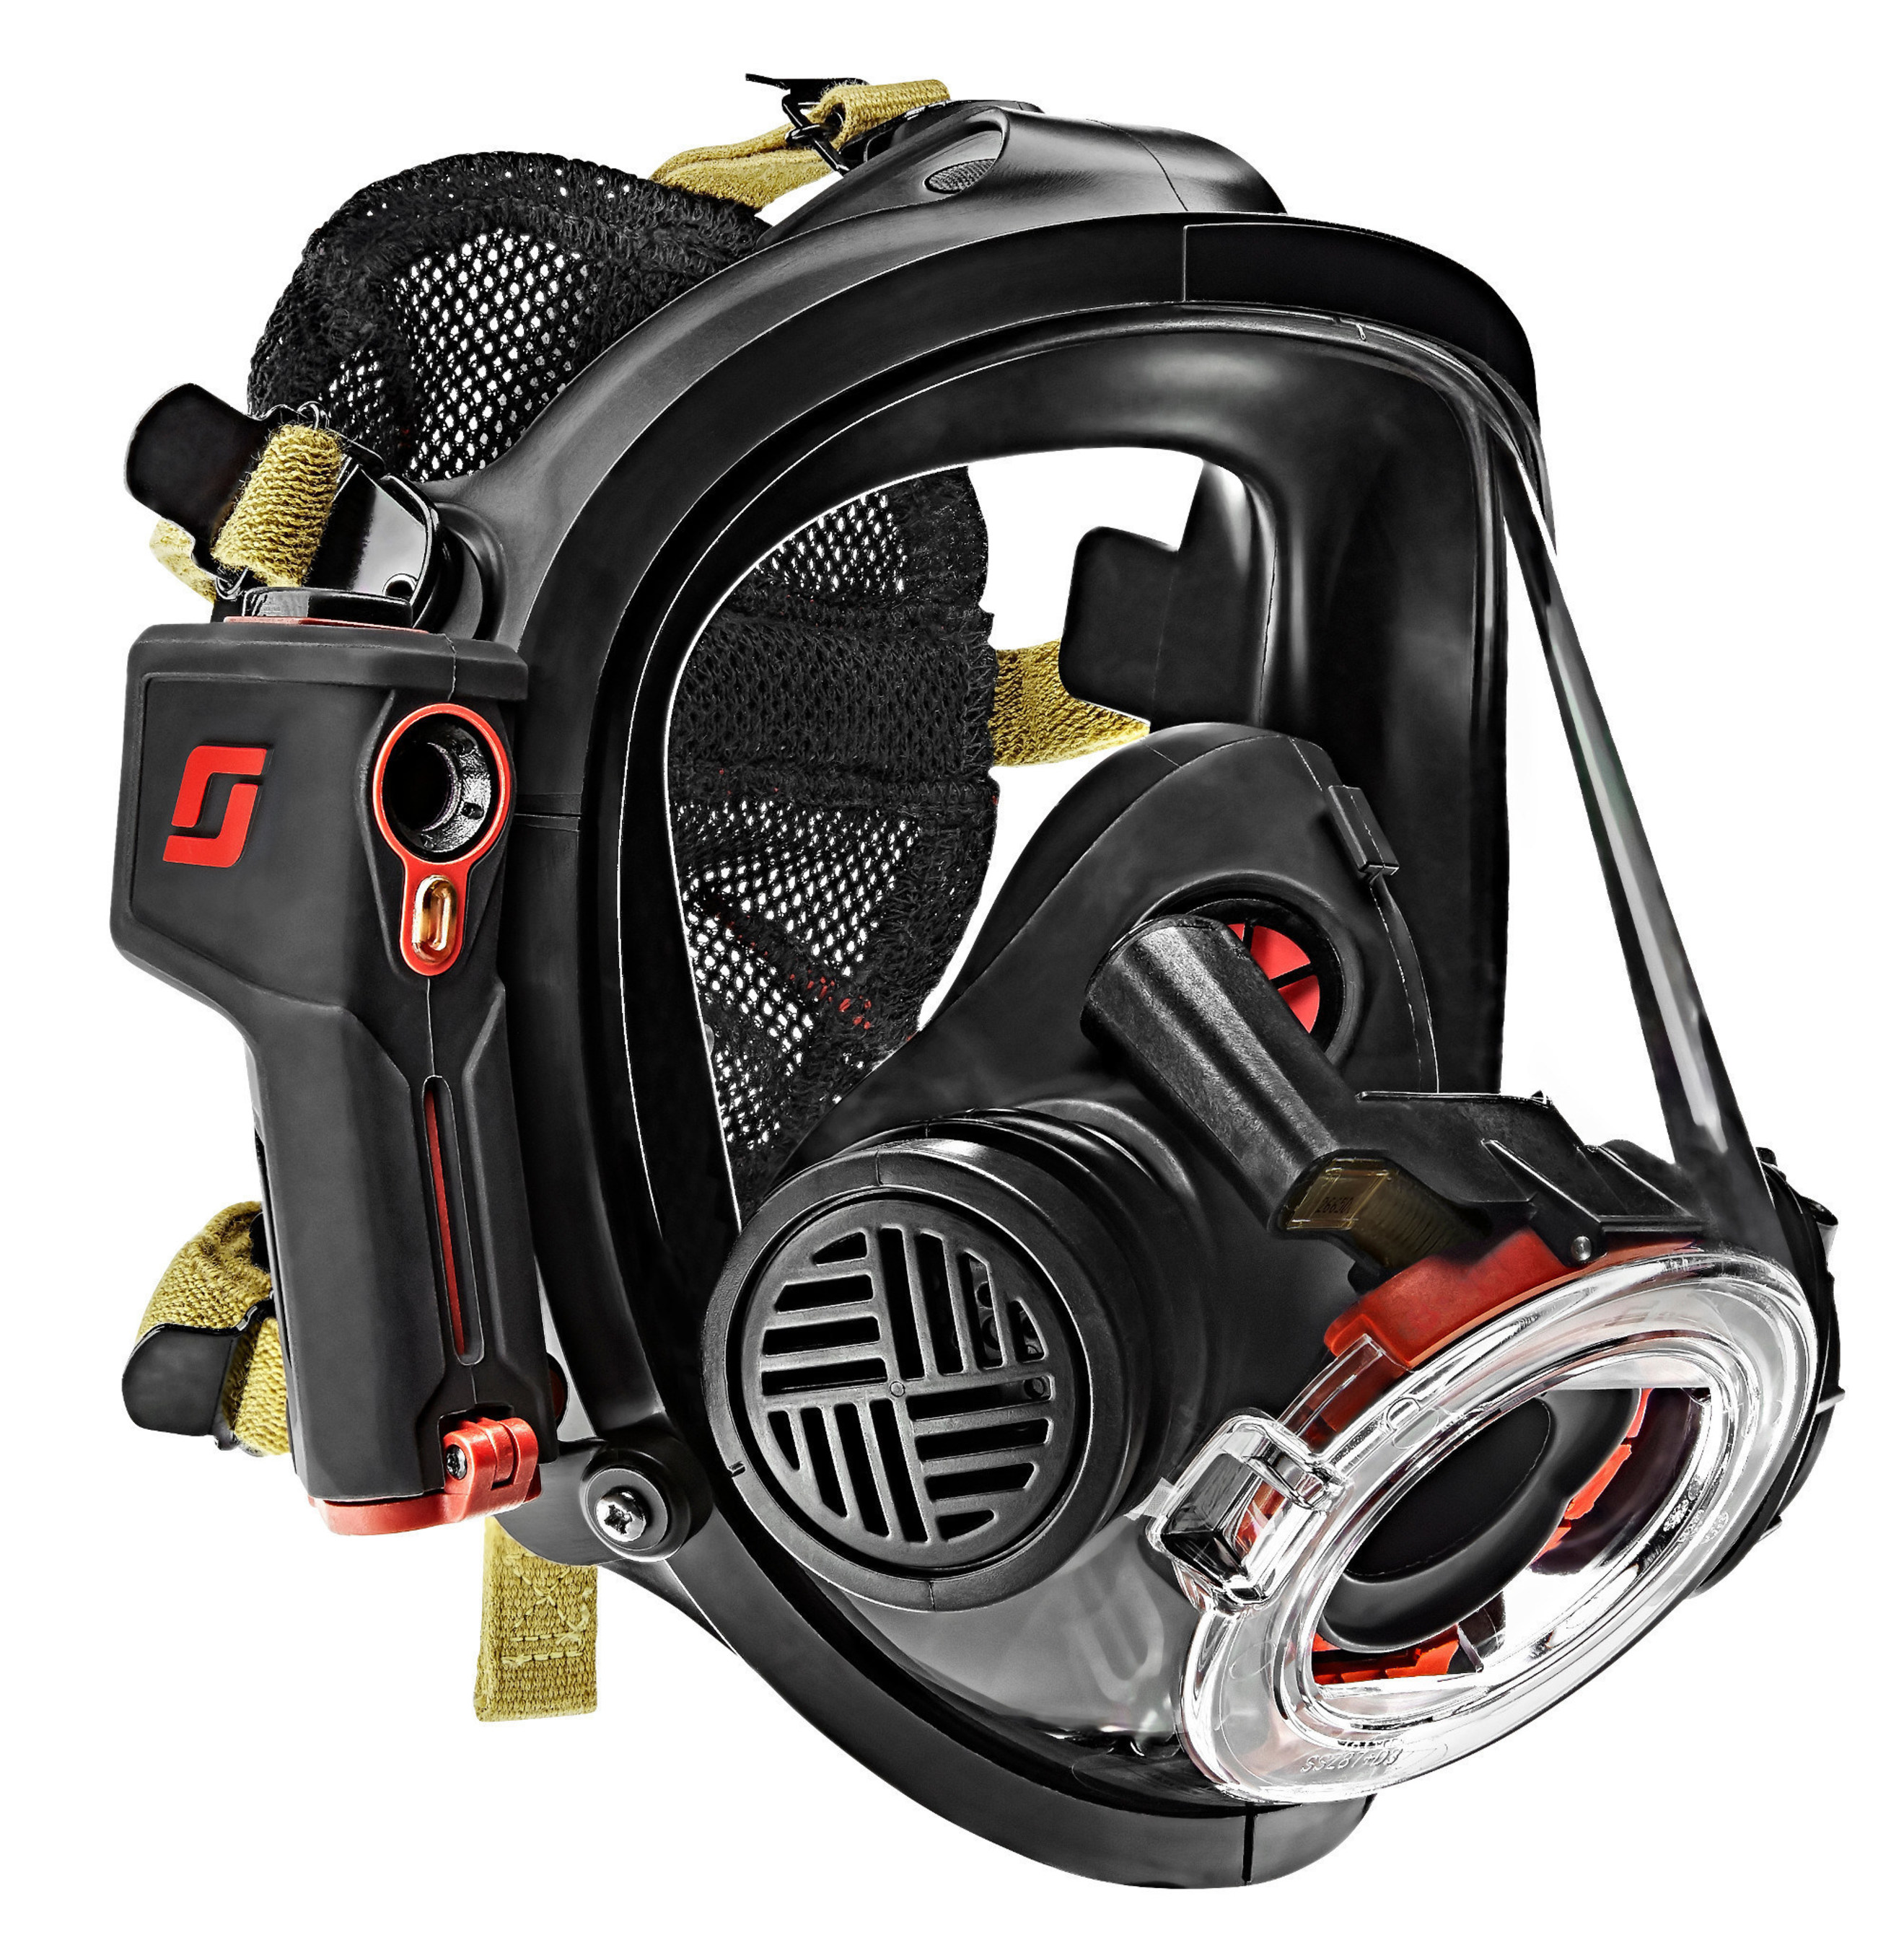 Scott Sight is the first in-mask thermal intelligence system for firefighters, an innovation of Scott Safety, Tyco's life safety products business,